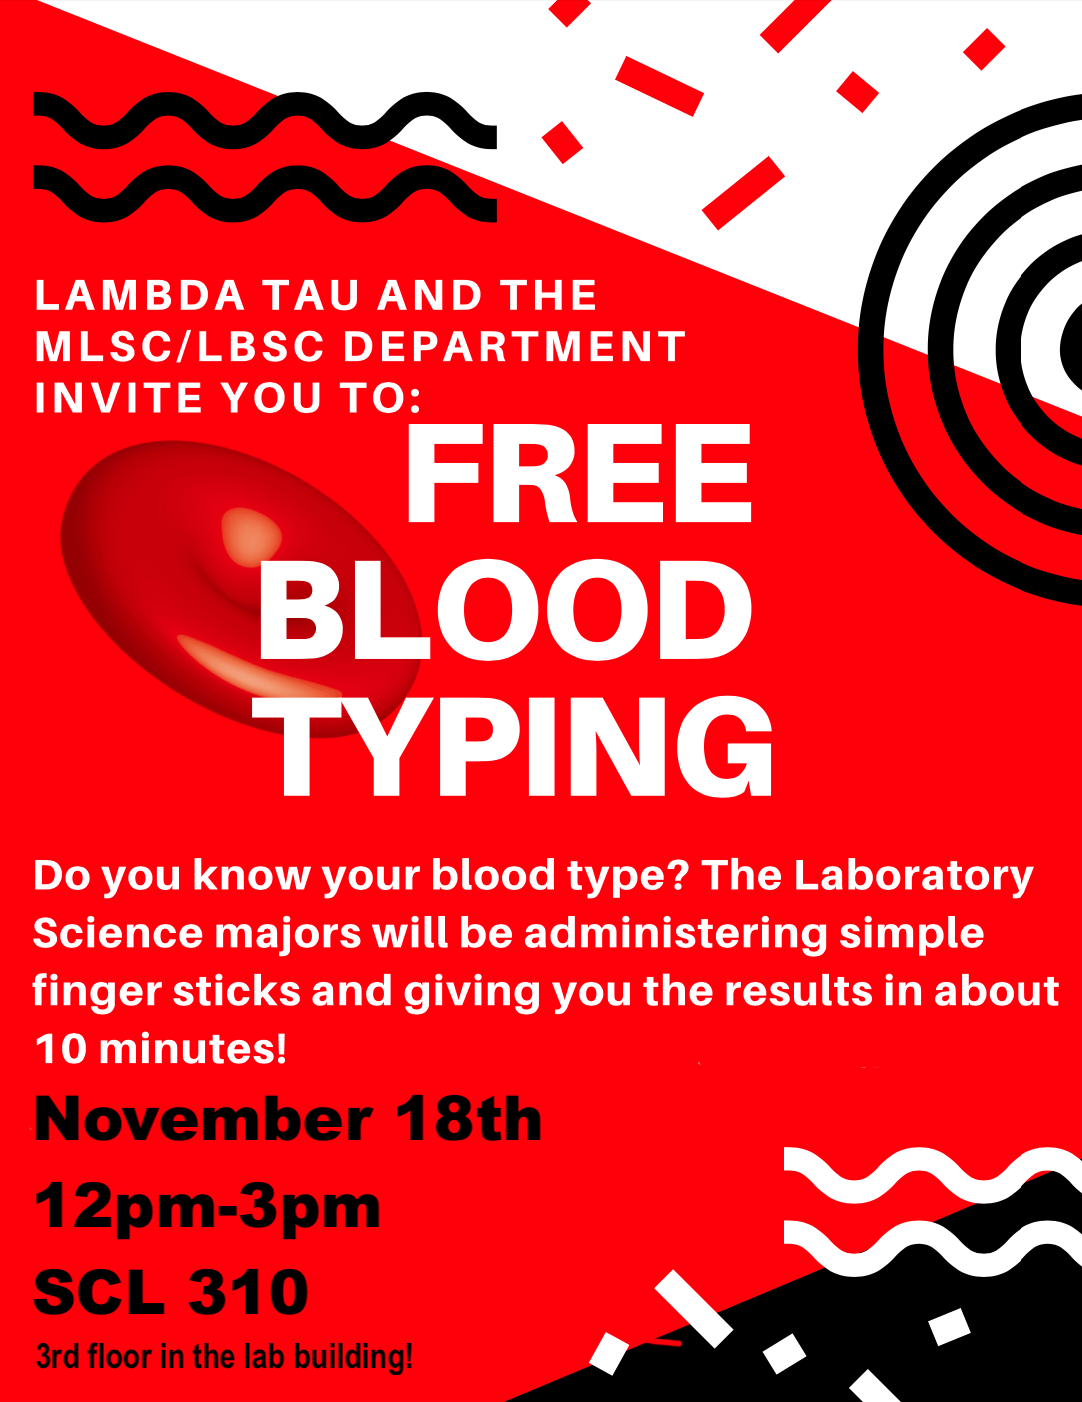 Learn your blood type on Nov. 18